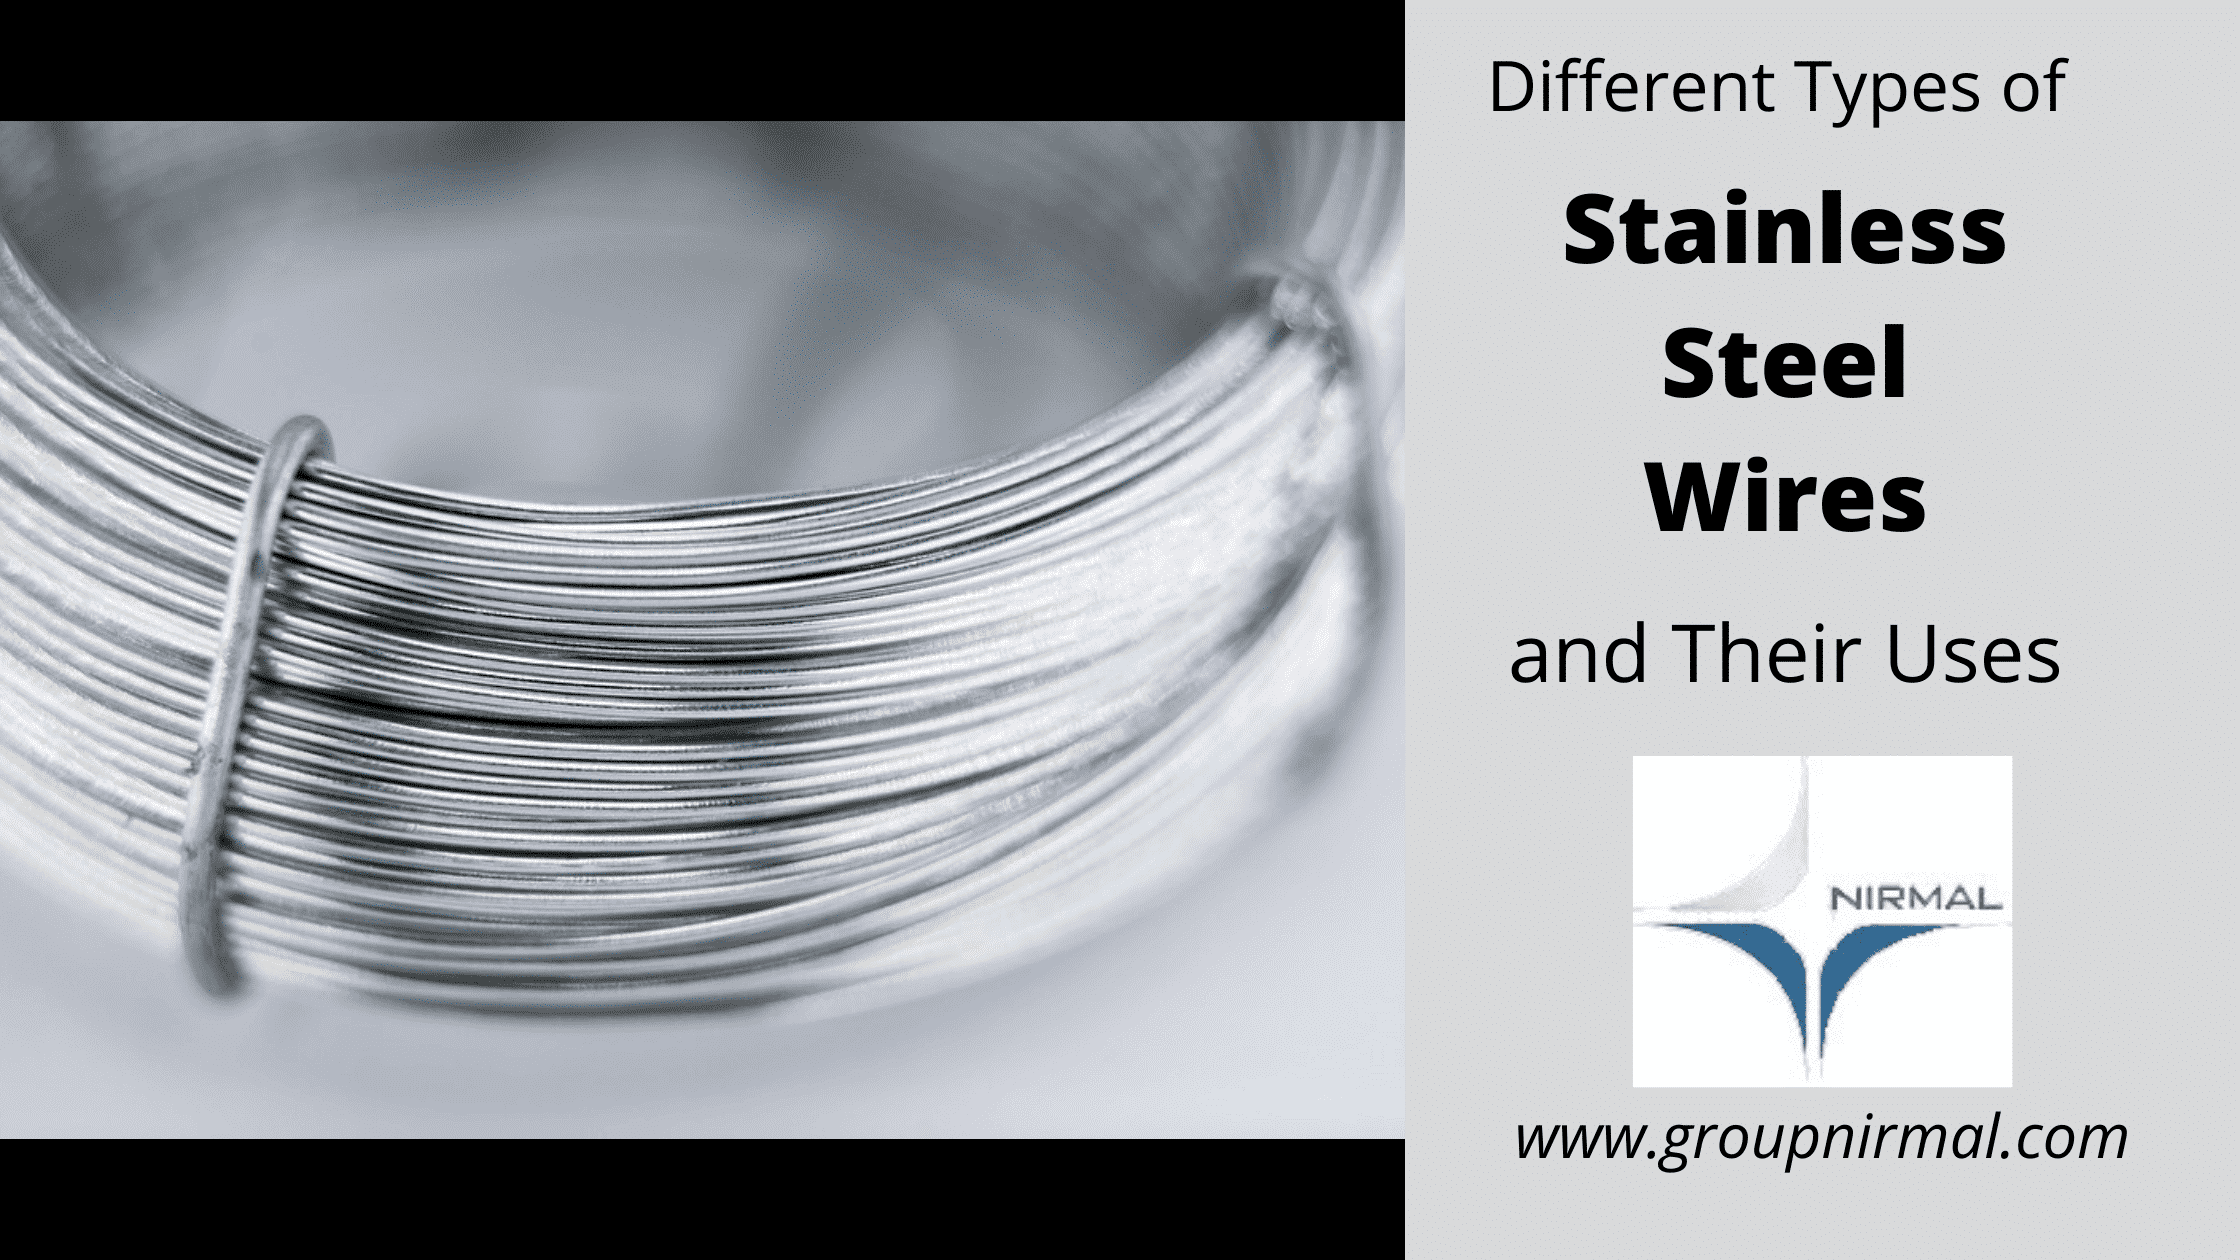 Different Types of Stainless Steel Wires and Their Uses